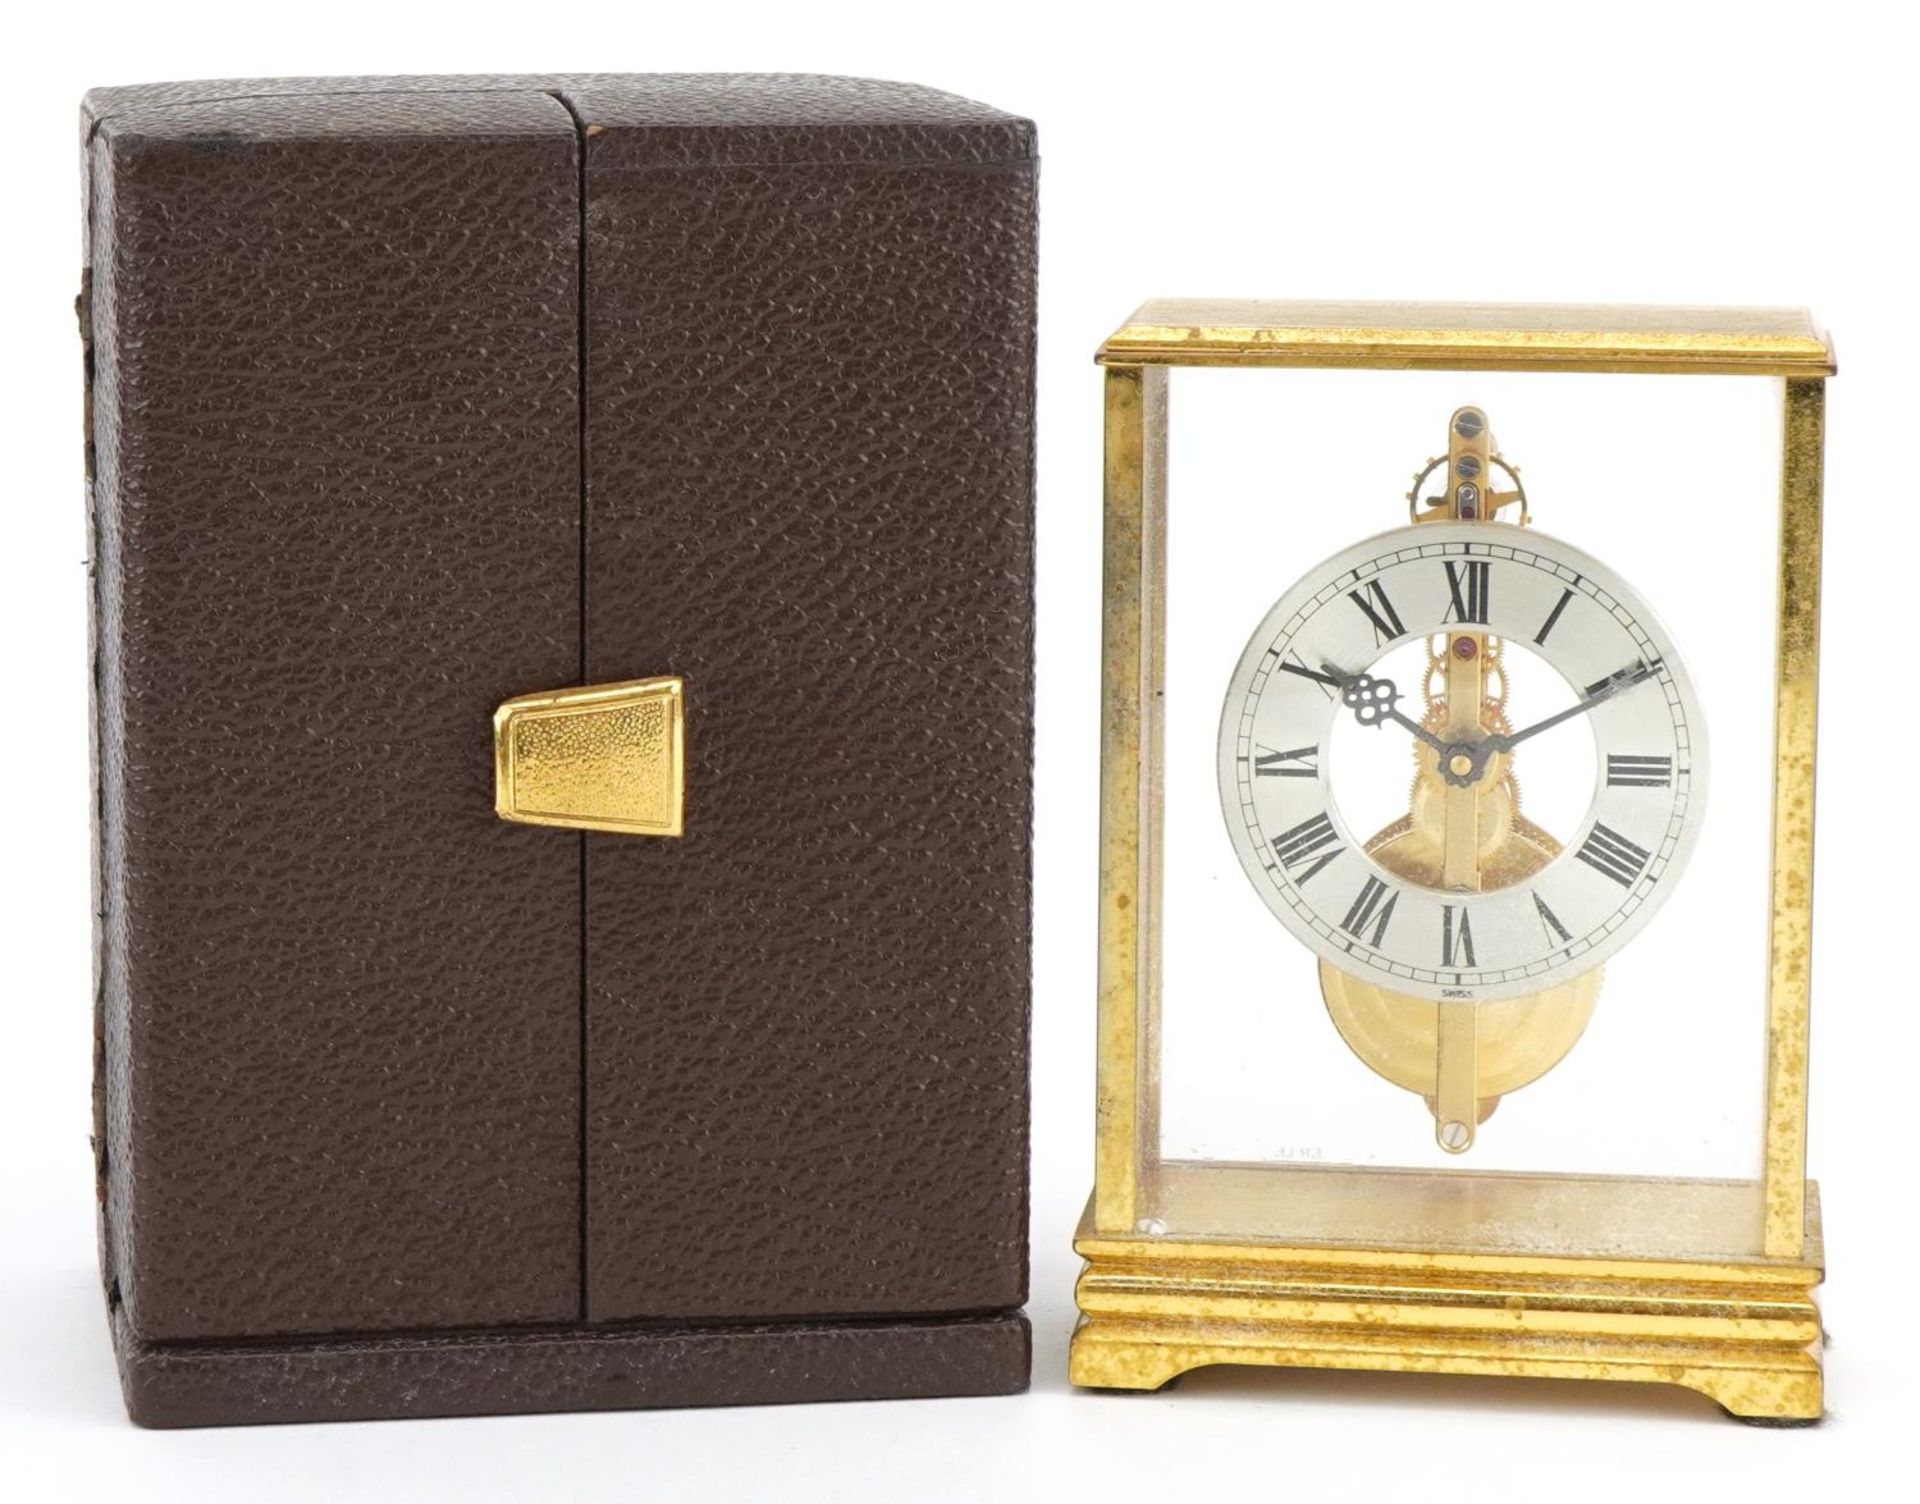 Jaeger LeCoultre, brass cased mystery desk clock with Roman numerals housed in a fitted case, the